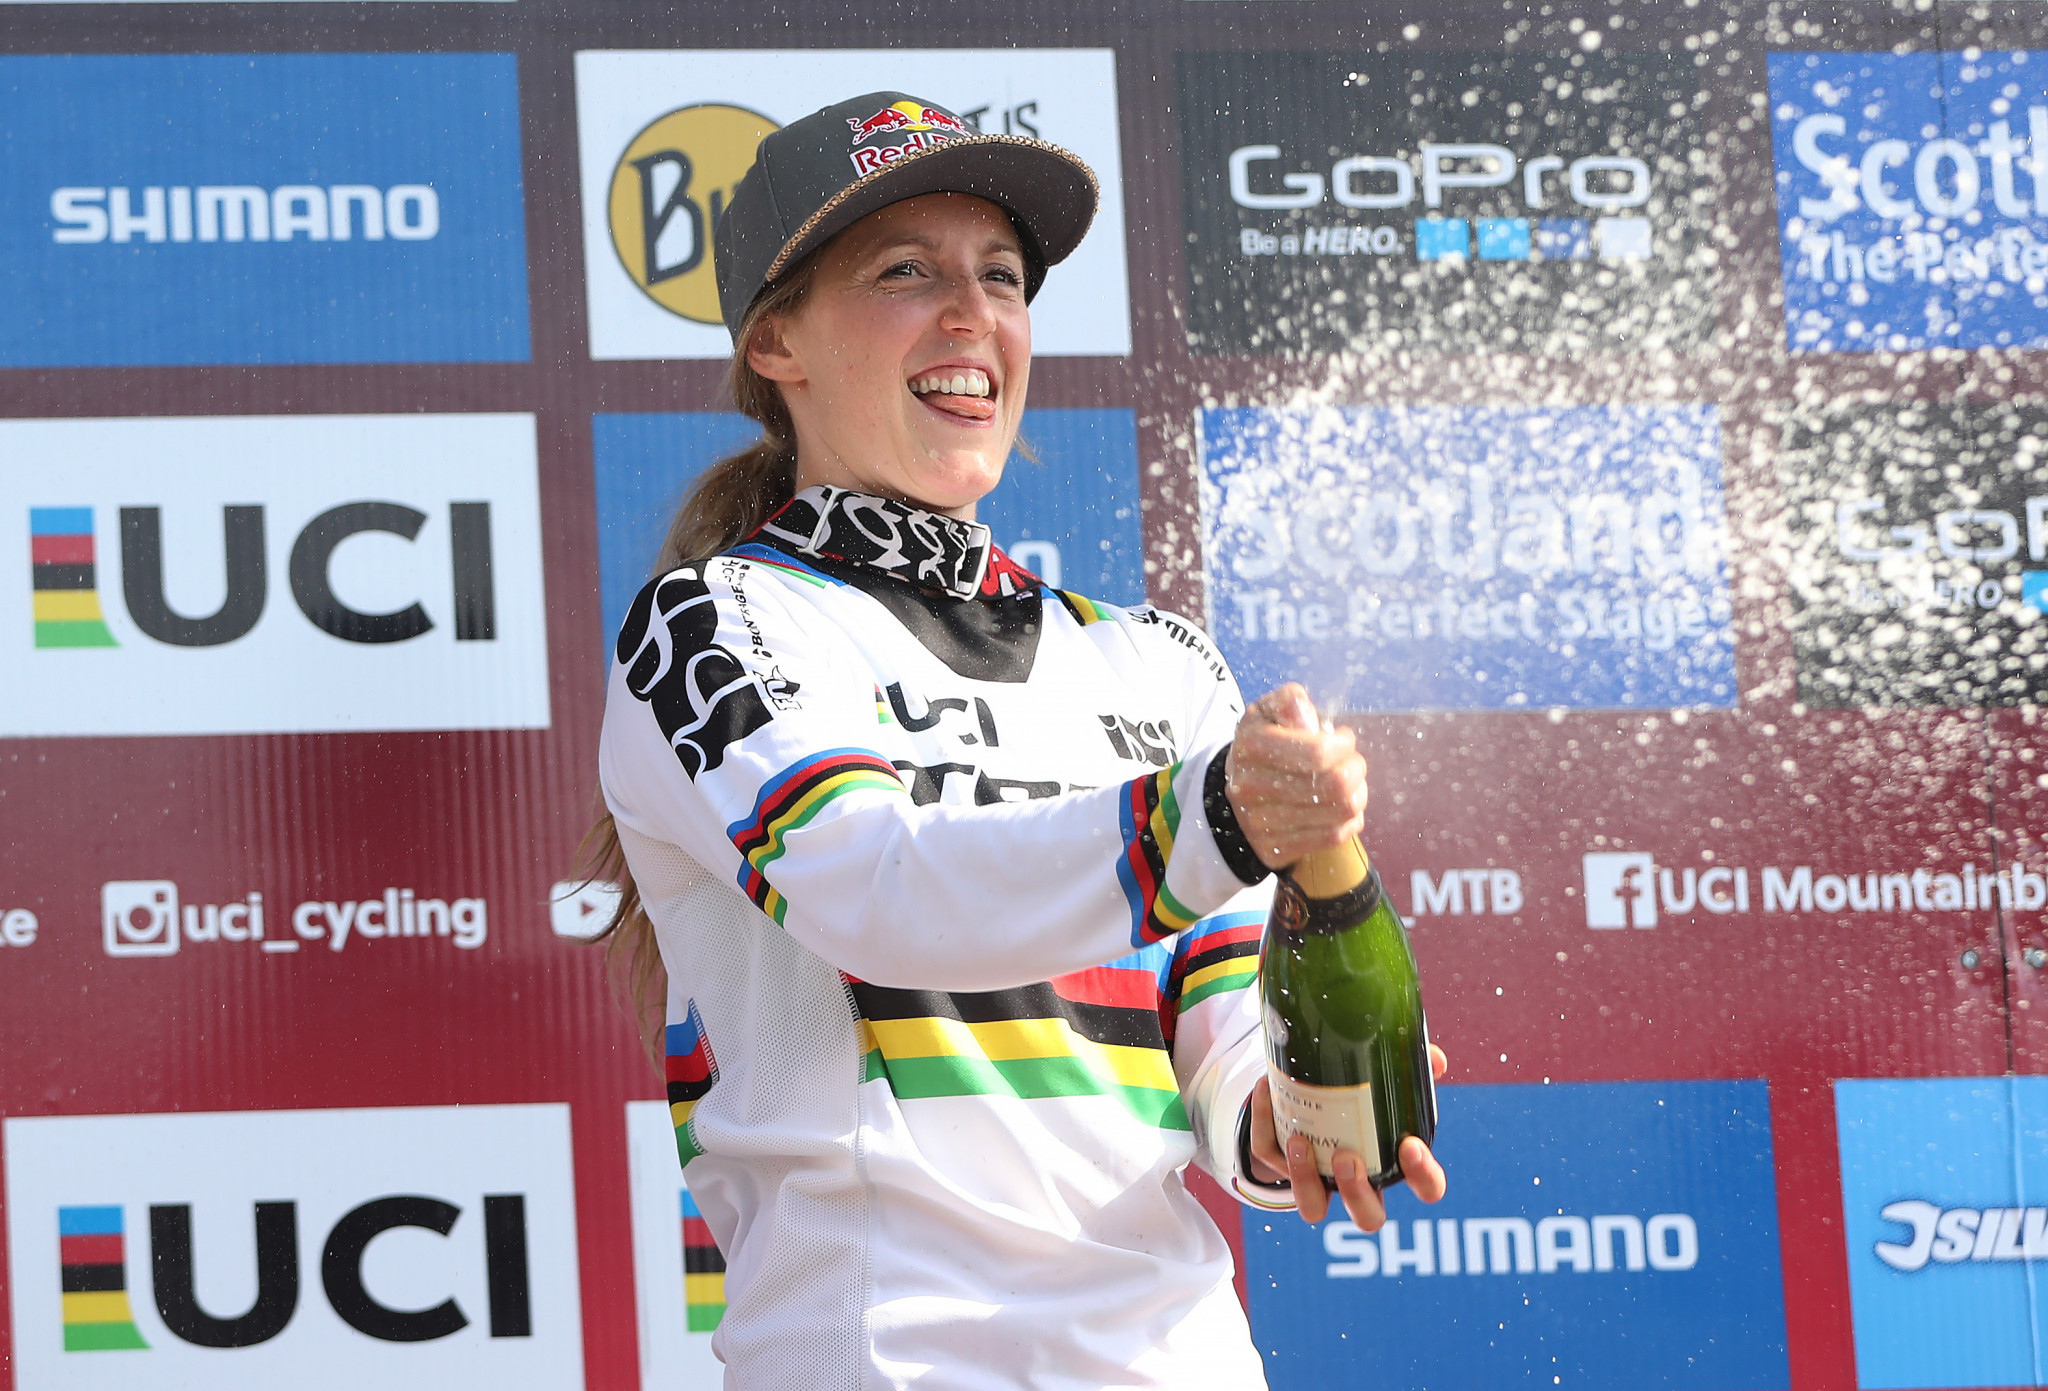 Great Britain's Rachel Atherton won the elite women's downhill World Championships today for the fifth time in her career ©Getty Images